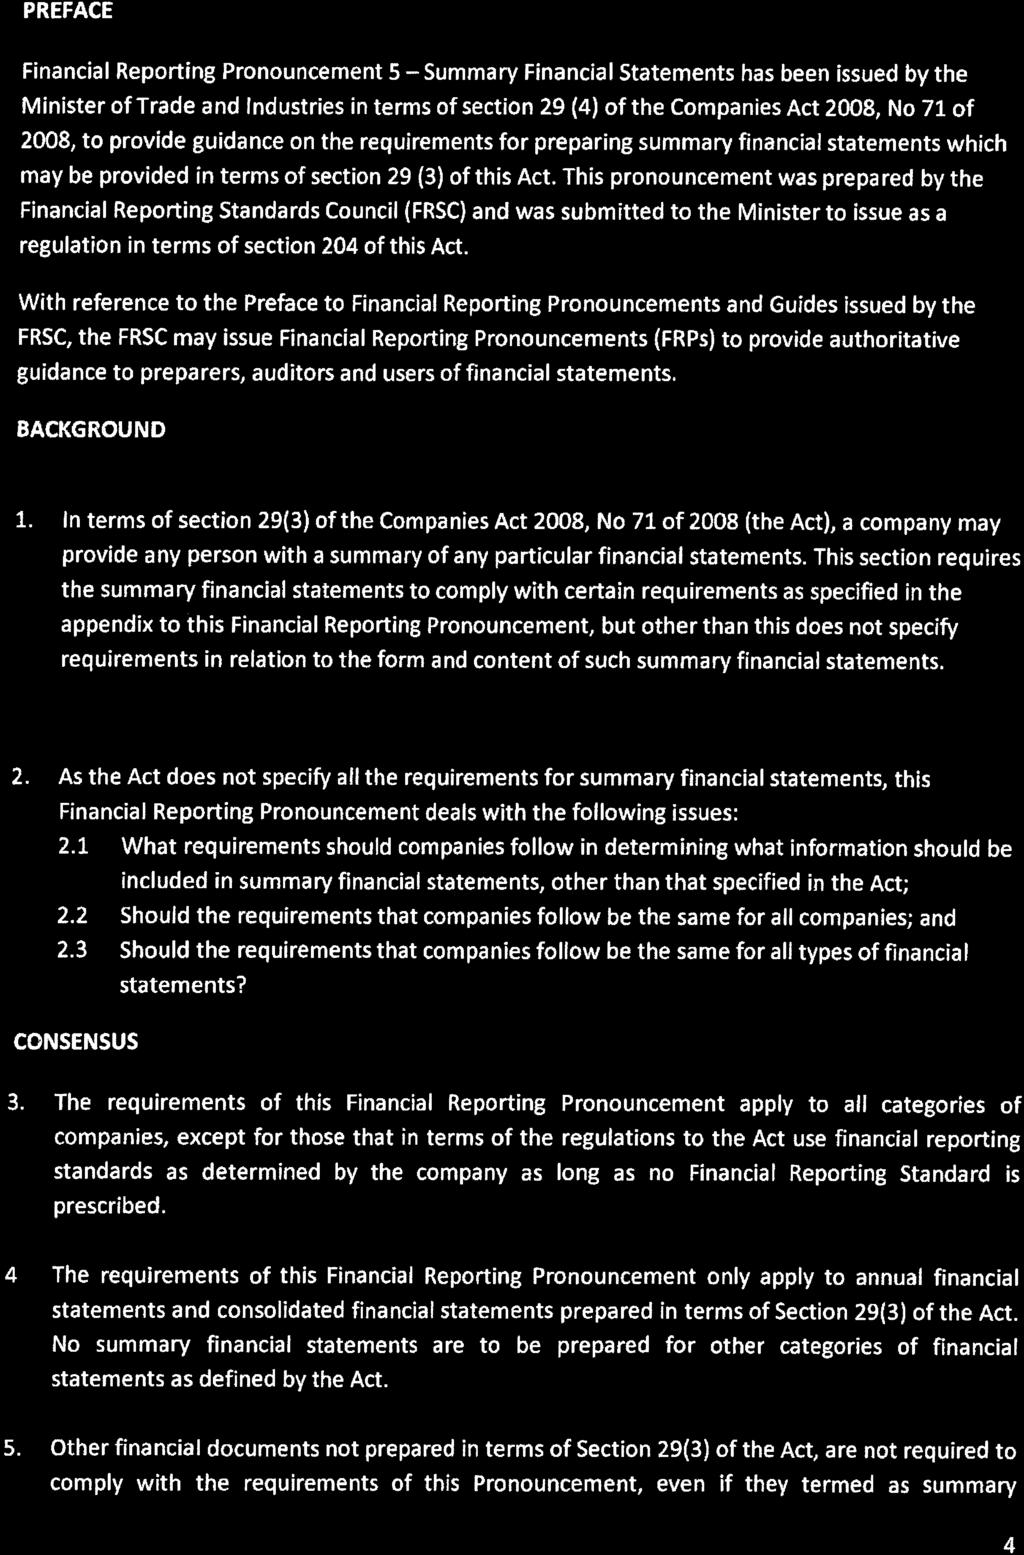 8 No. 41338 GOVERNMENT GAZETTE, 18 DECEMBER 2017 PREFACE Financial Reporting Pronouncement 5 - Summary Financial Statements has been issued by the Minister of Trade and Industries in terms of section